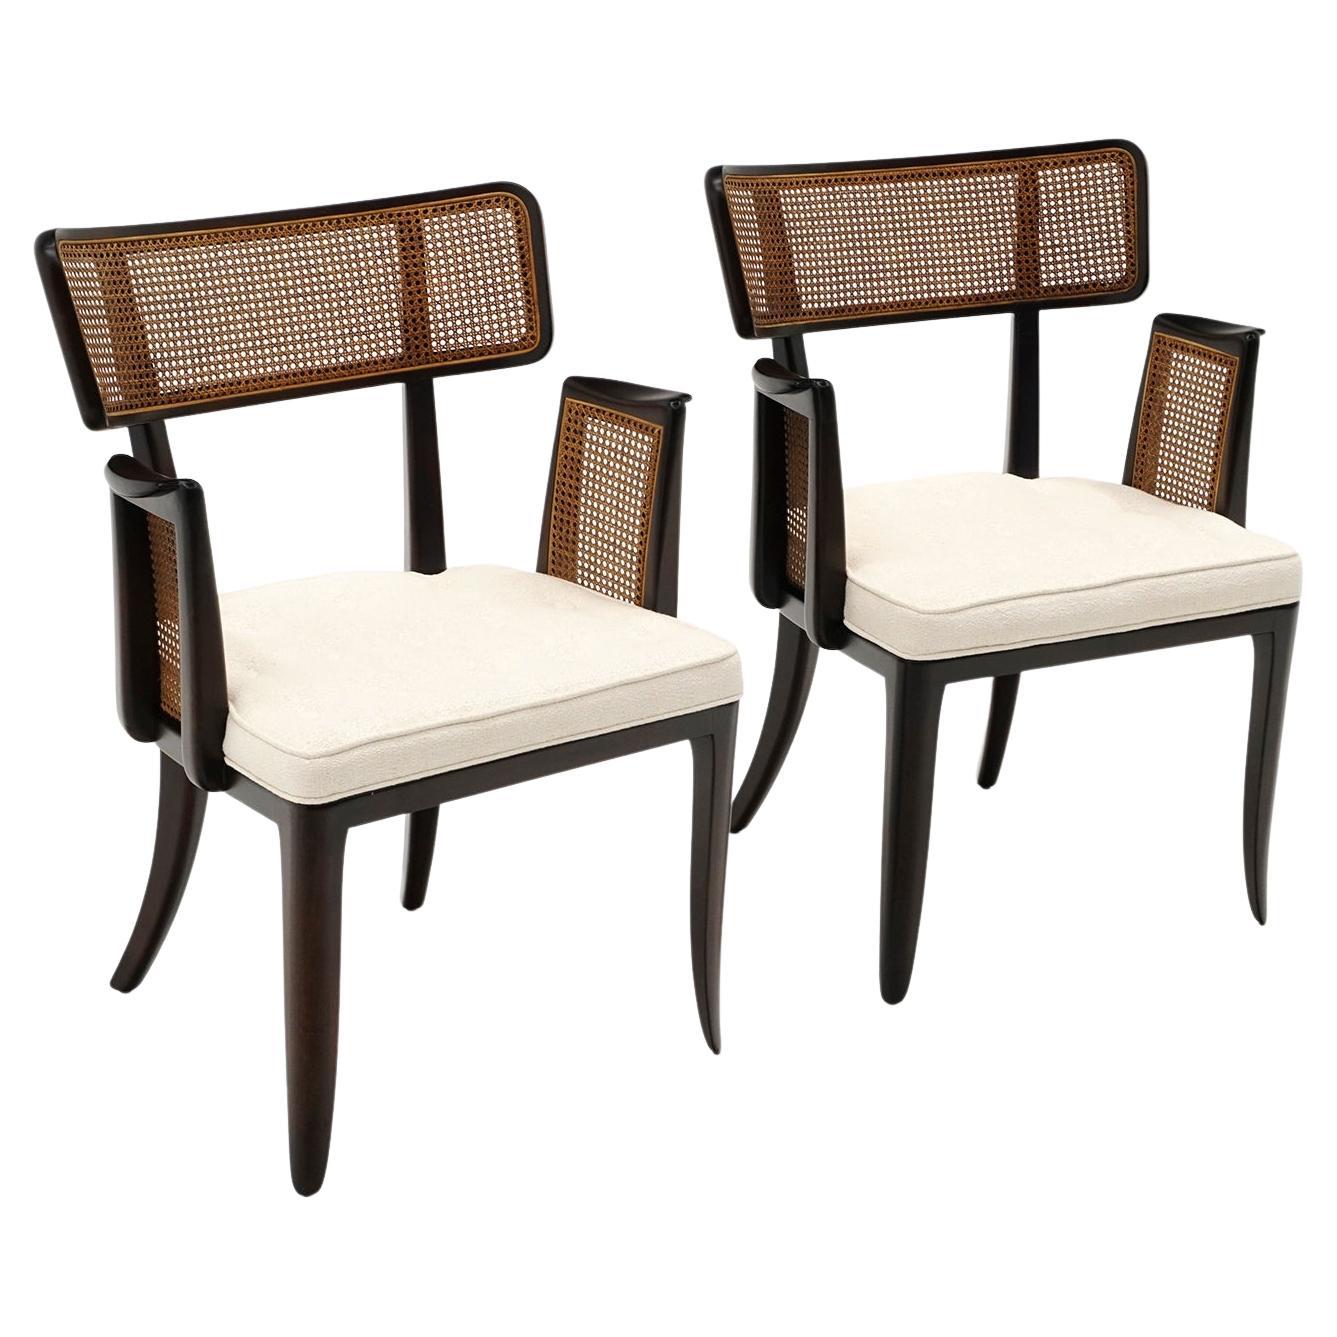 Pair Dunbar Dining Chairs with Arms. Dark Mahogany, Cane, Off White Boucle